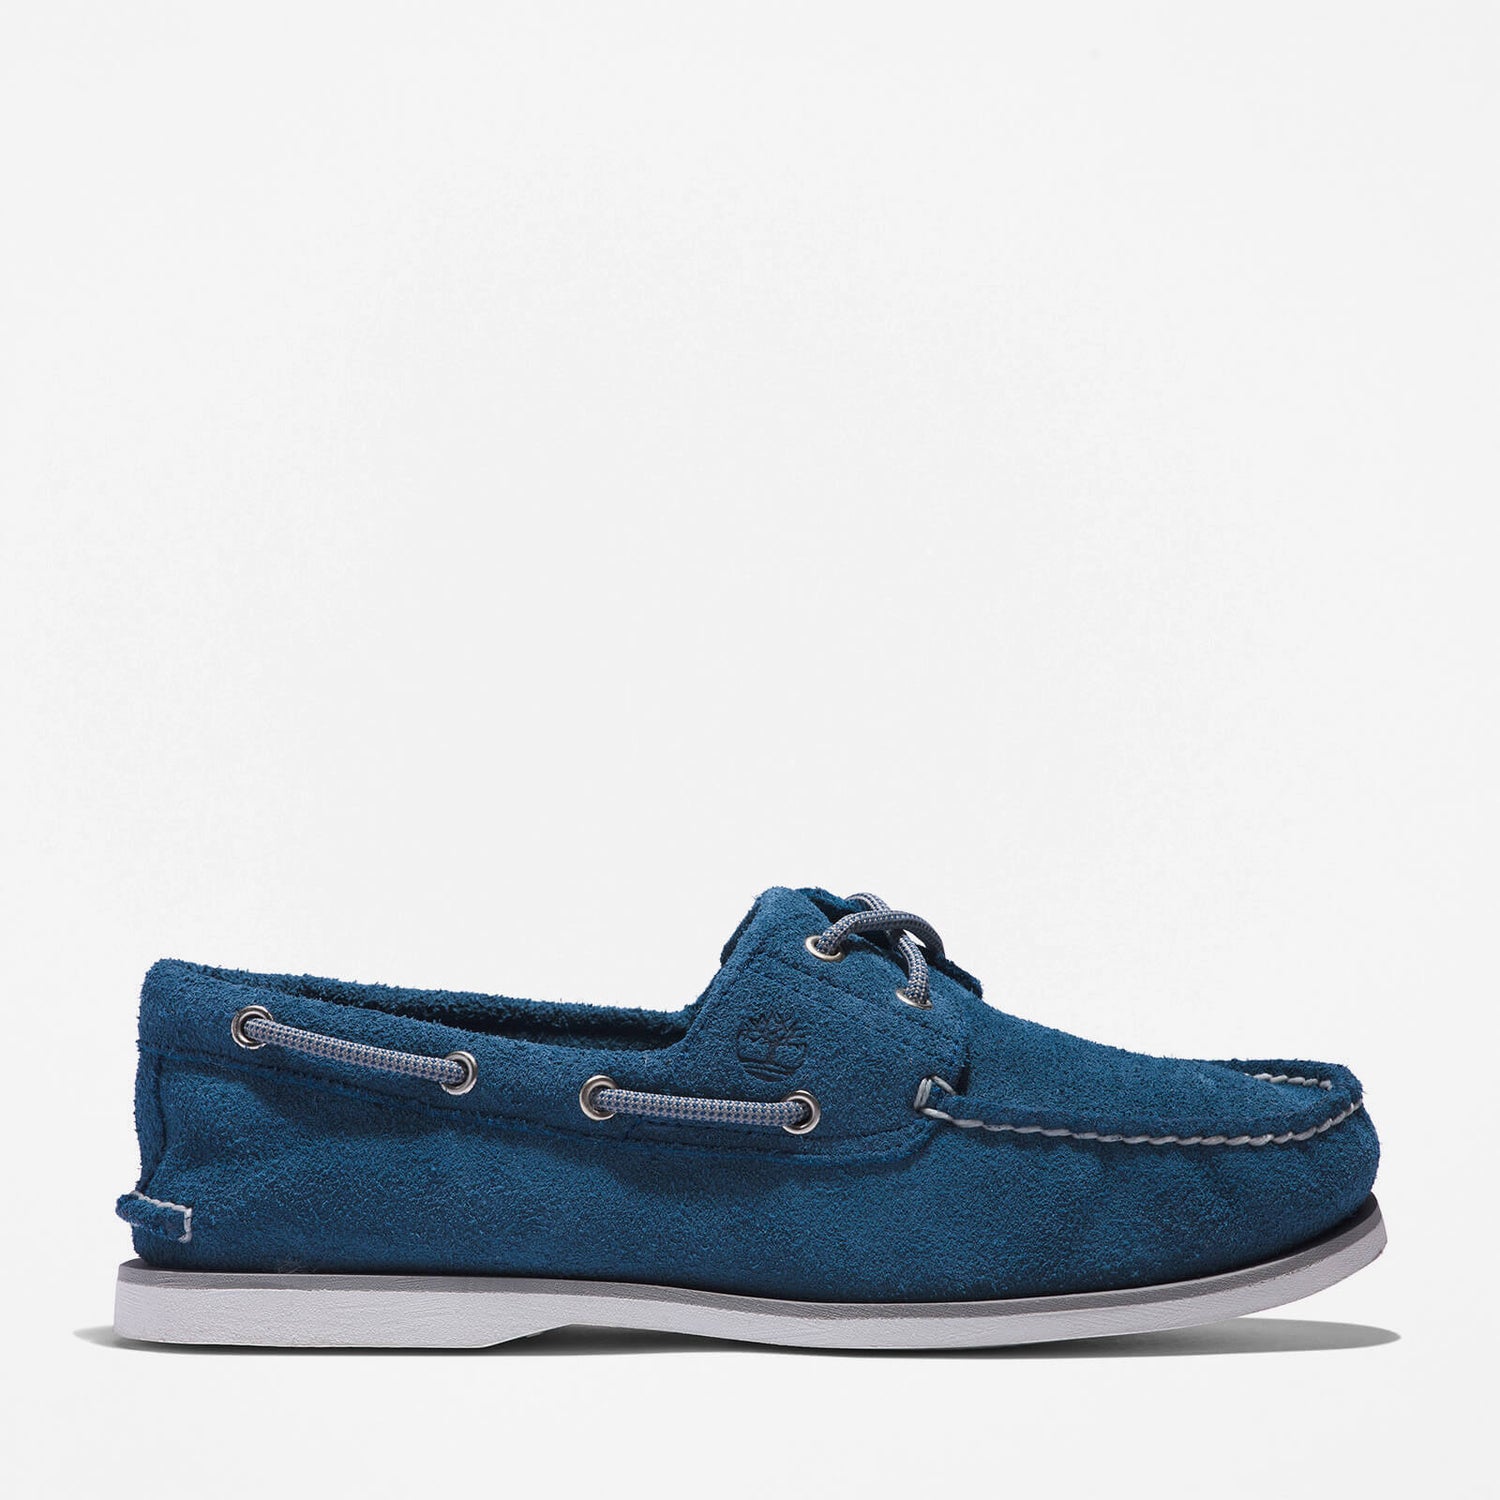 Timberland Men's Classic 2-Eye Suede Boat Shoes - Dark Blue